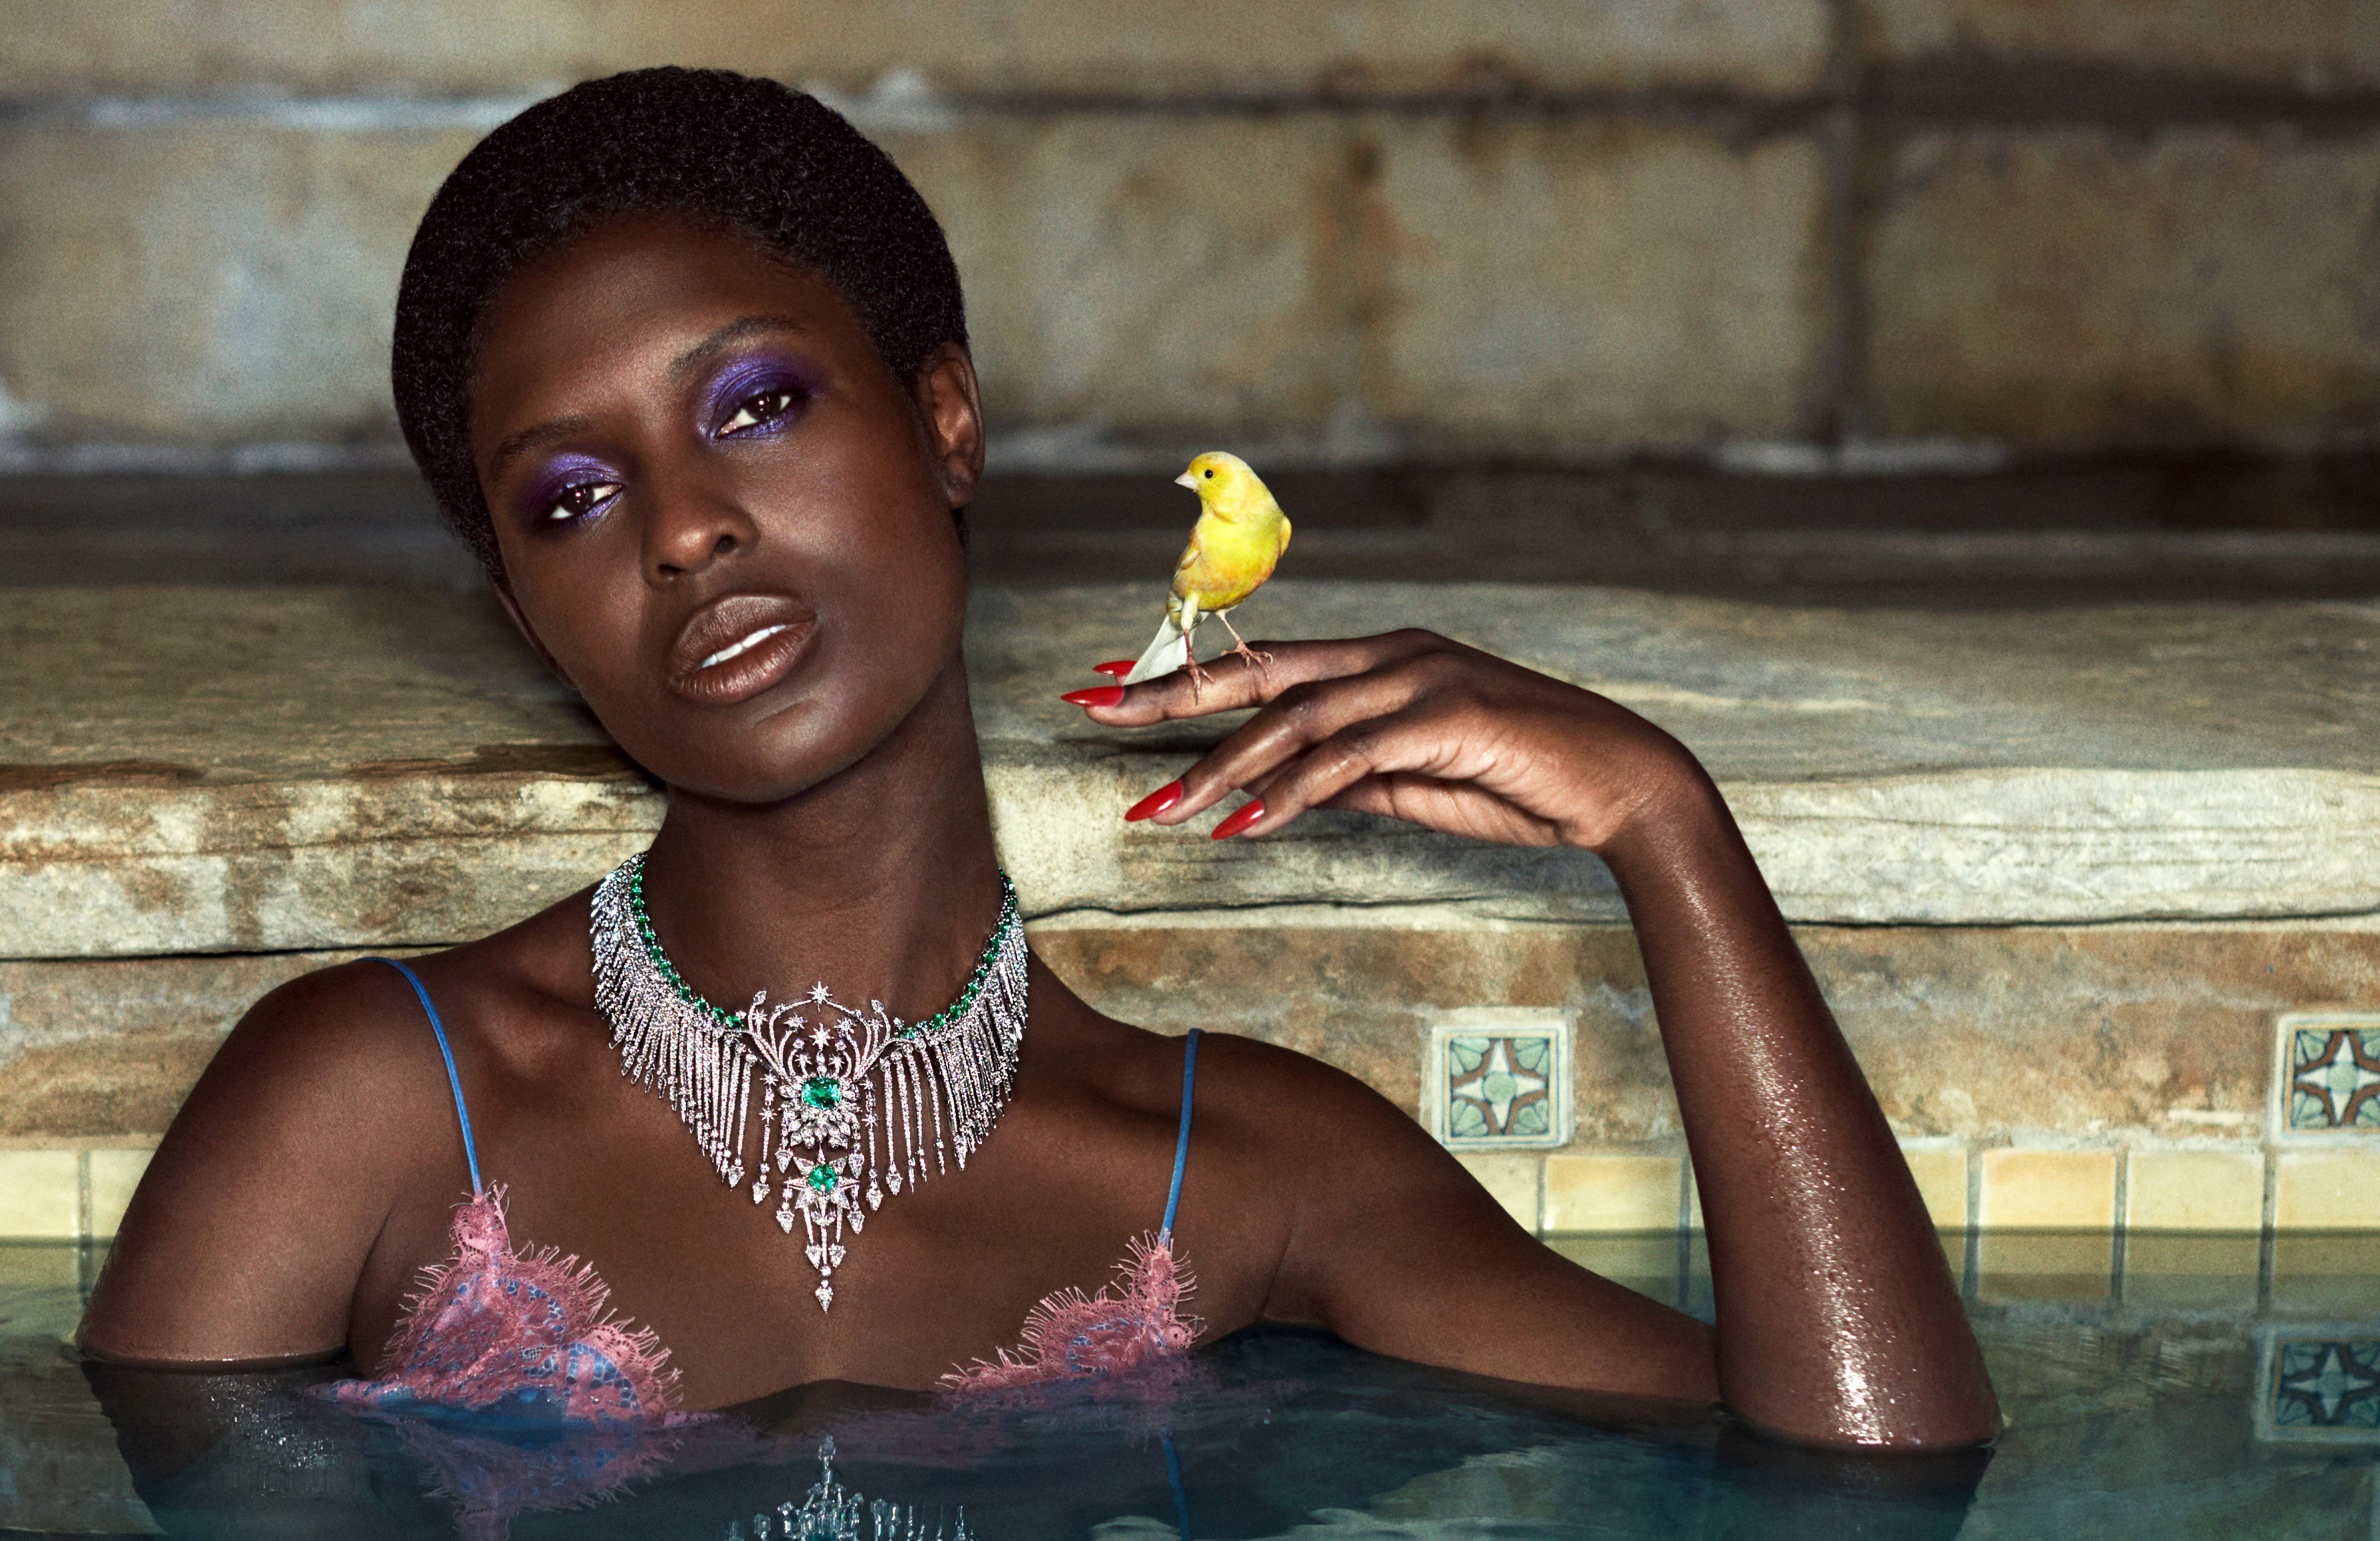 Gucci's Hortus Deliciarum High Jewelry with Jodie Turner-Smith